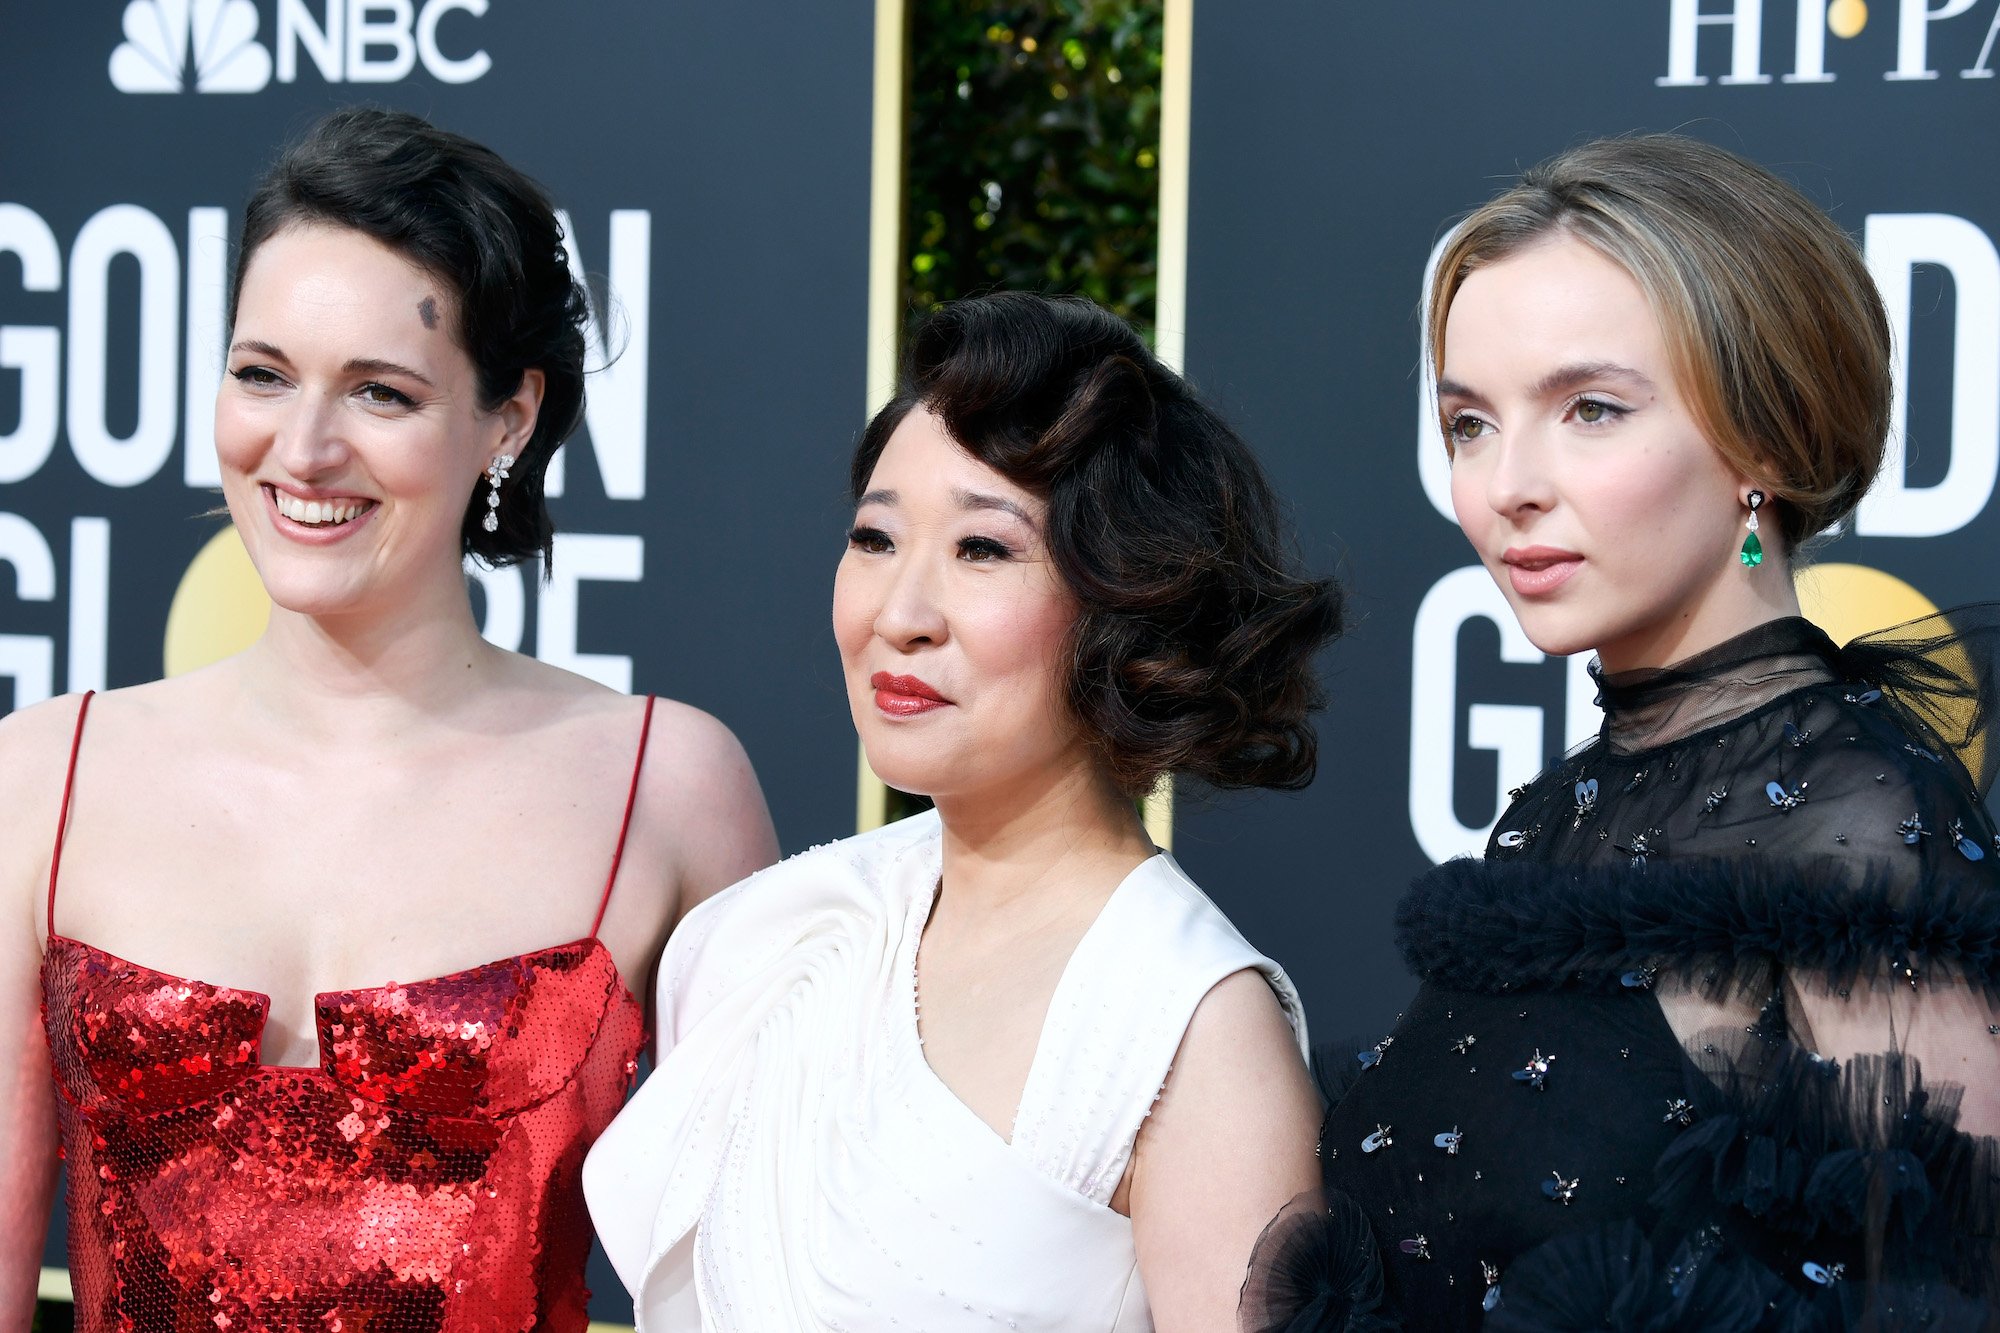 Phoebe Waller-Bridge. Sandra Oh, and Jodie Comer at the 76th Annual Golden Globe Awards on January 6, 2019.